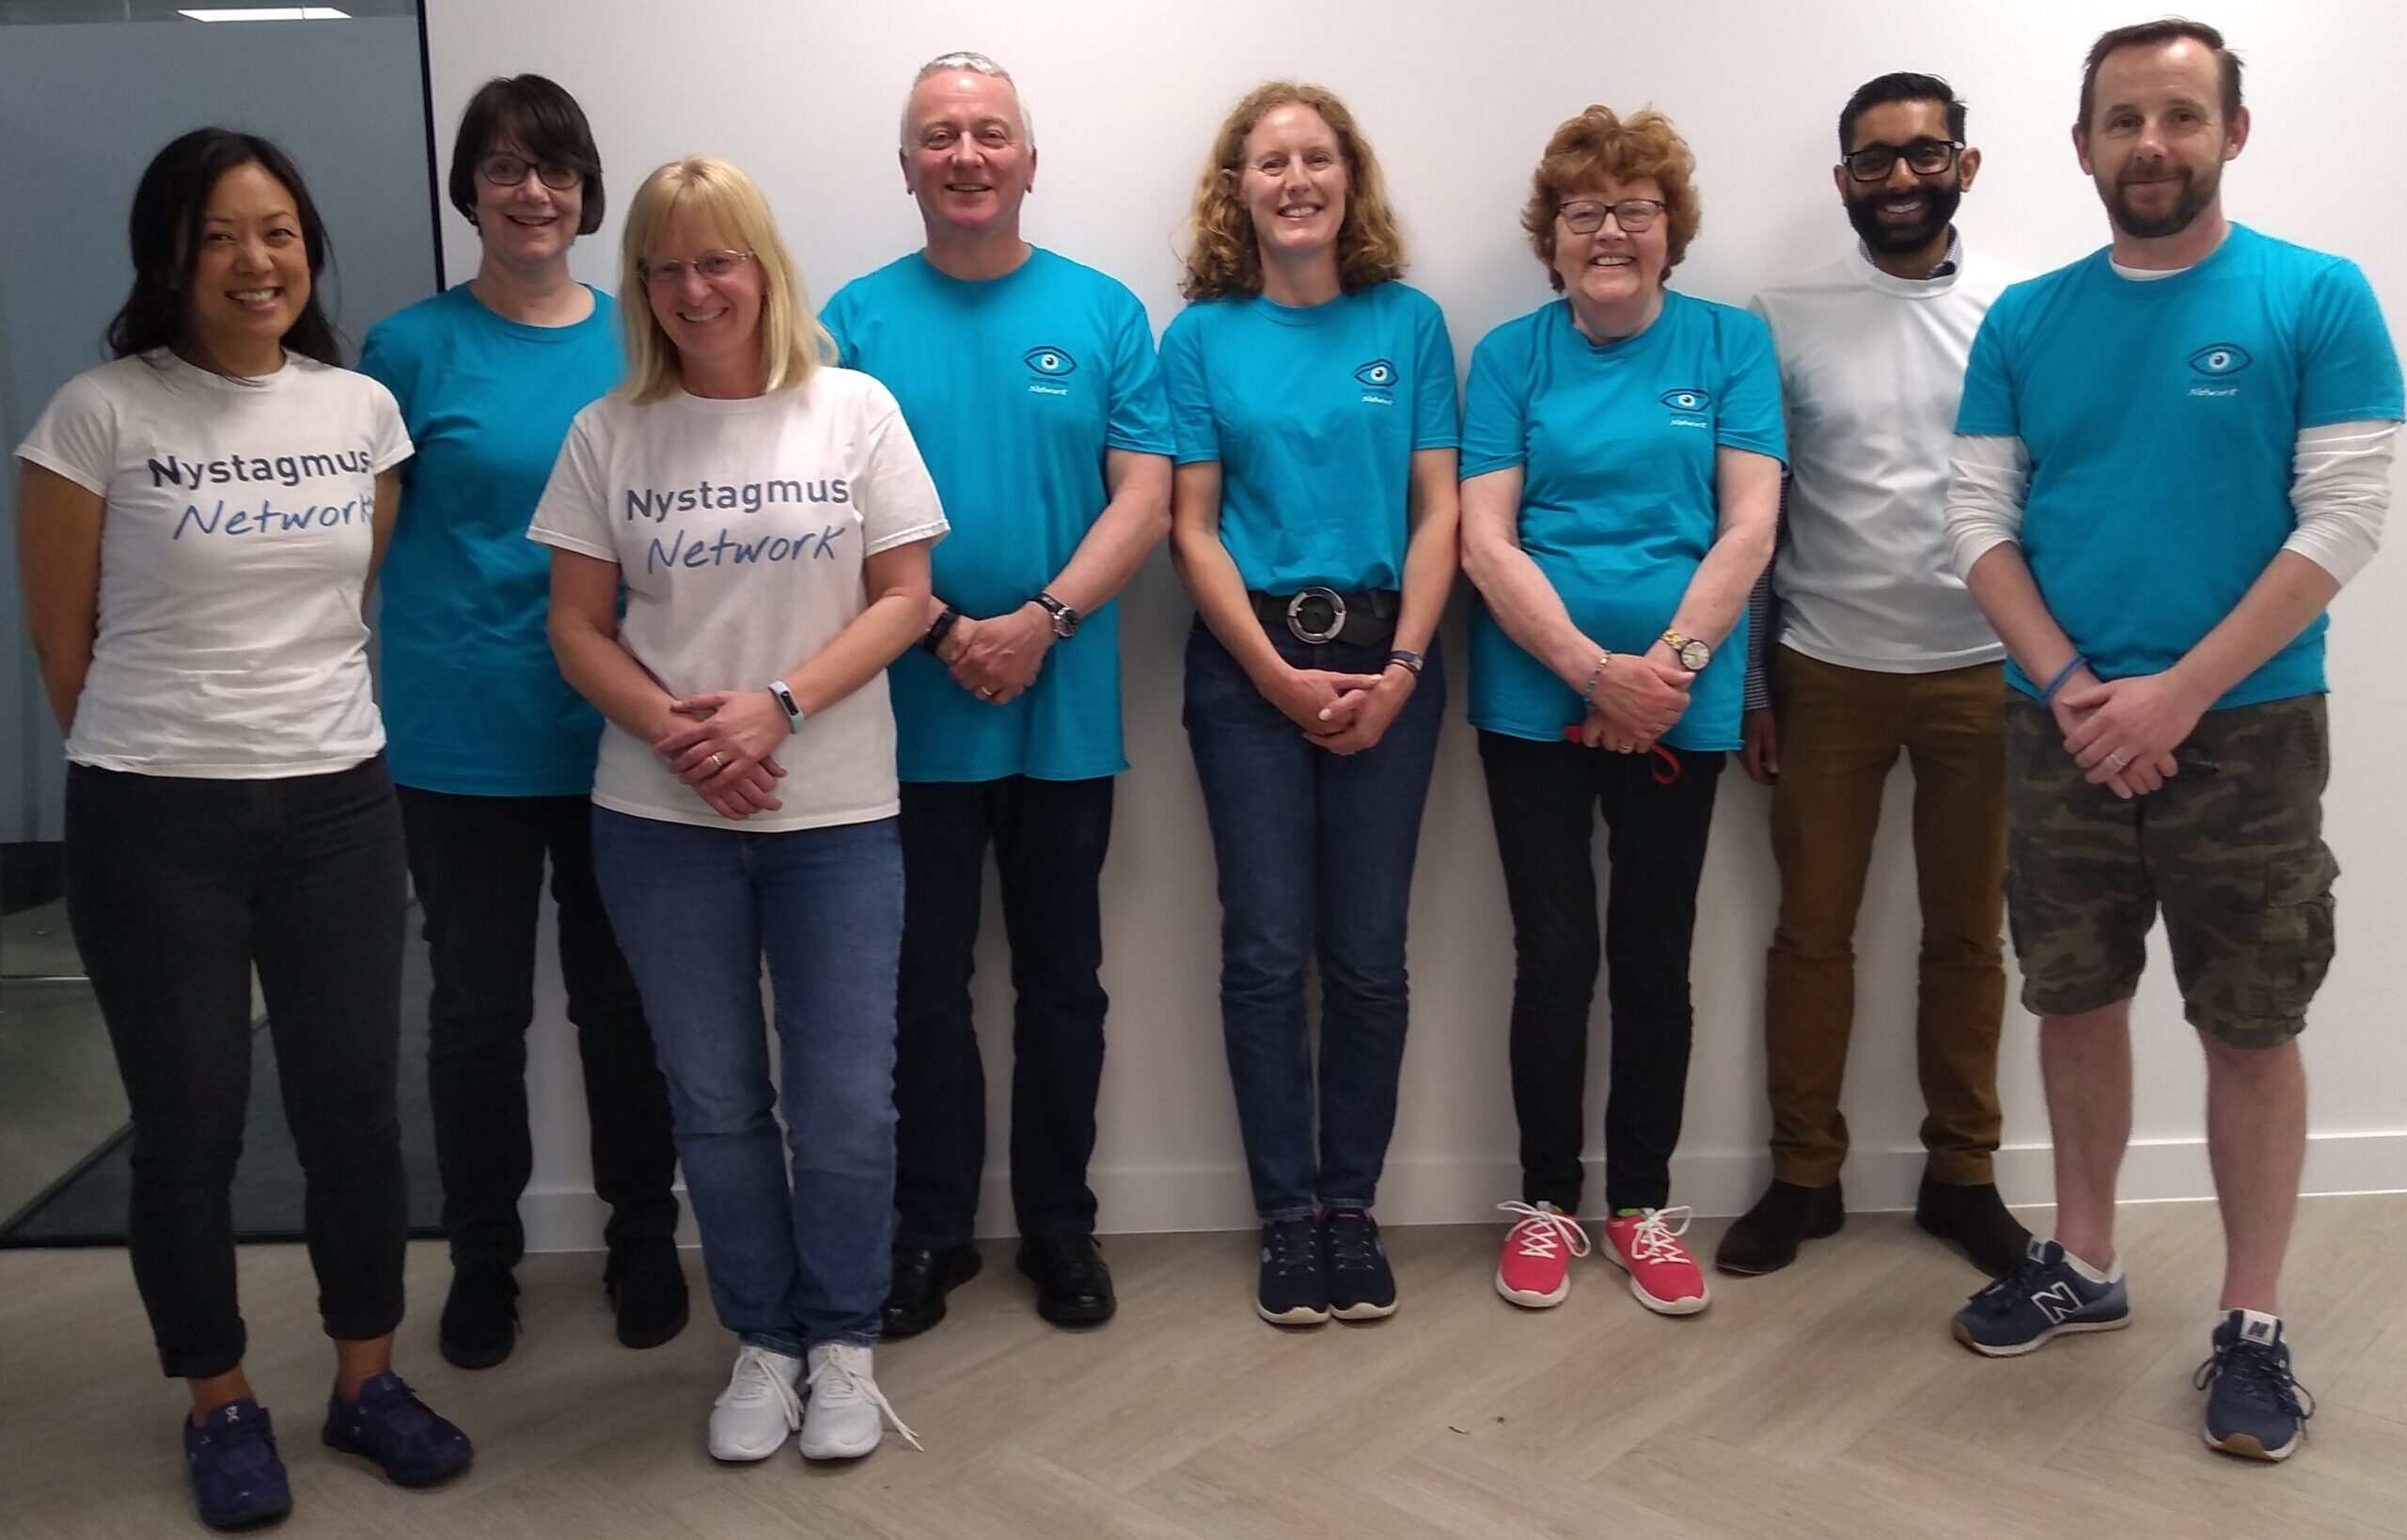 Trustees in their charity T-shirts.